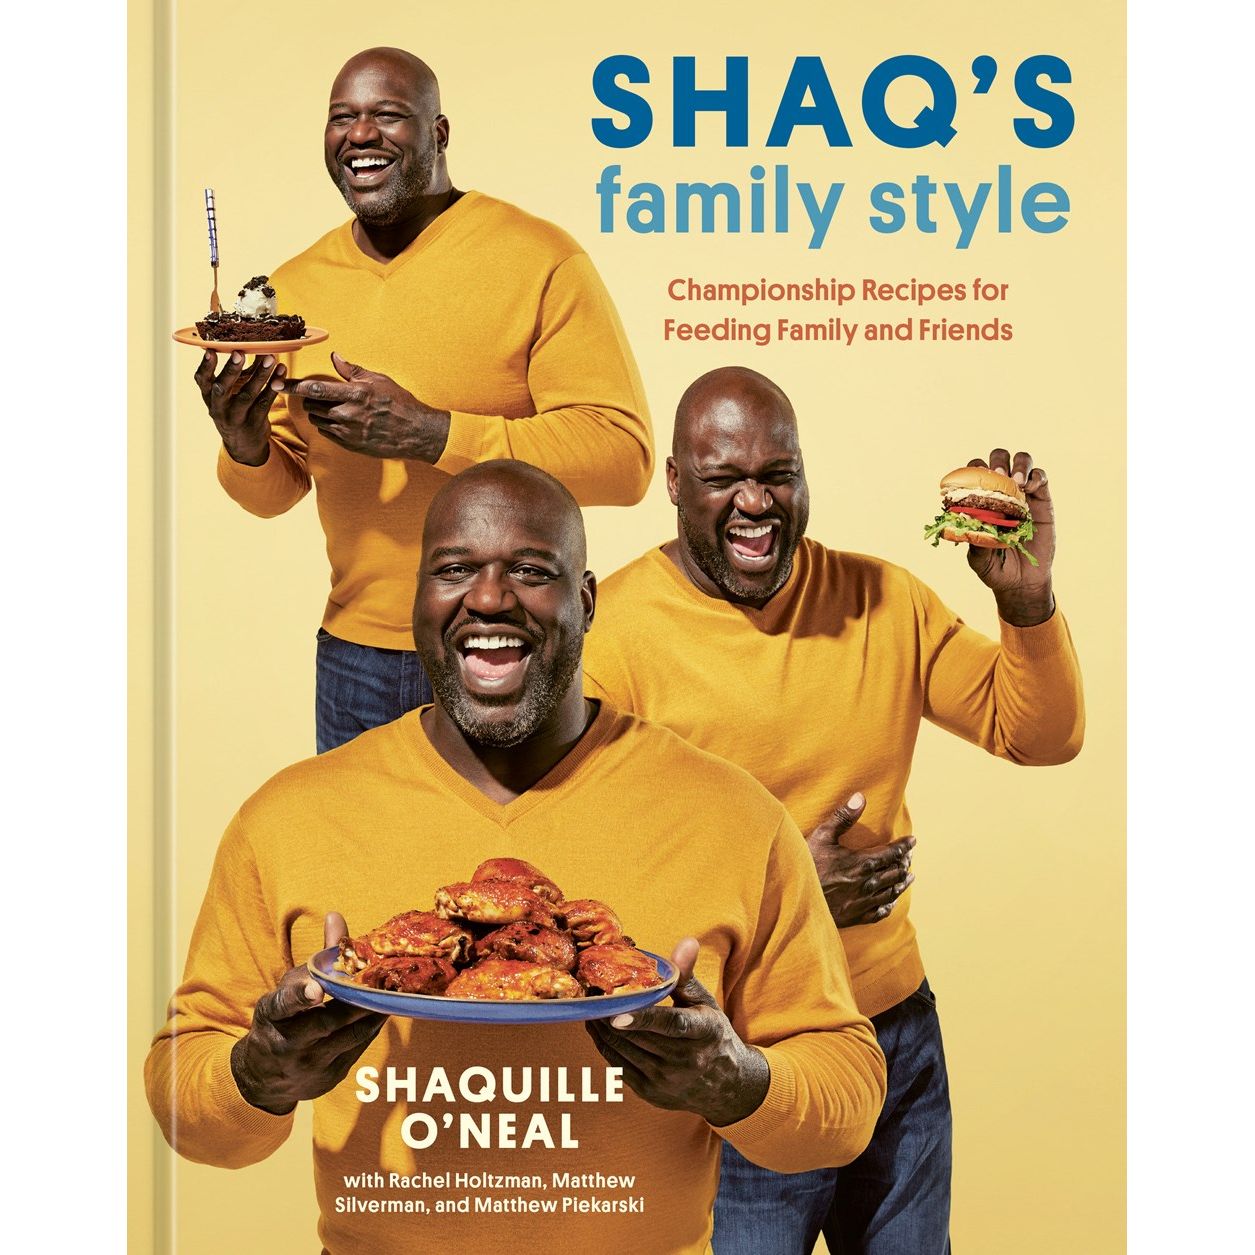 Shaq's Family Style: Championship Recipes for Feeding Family and Friends (Shaquille O'Neal)